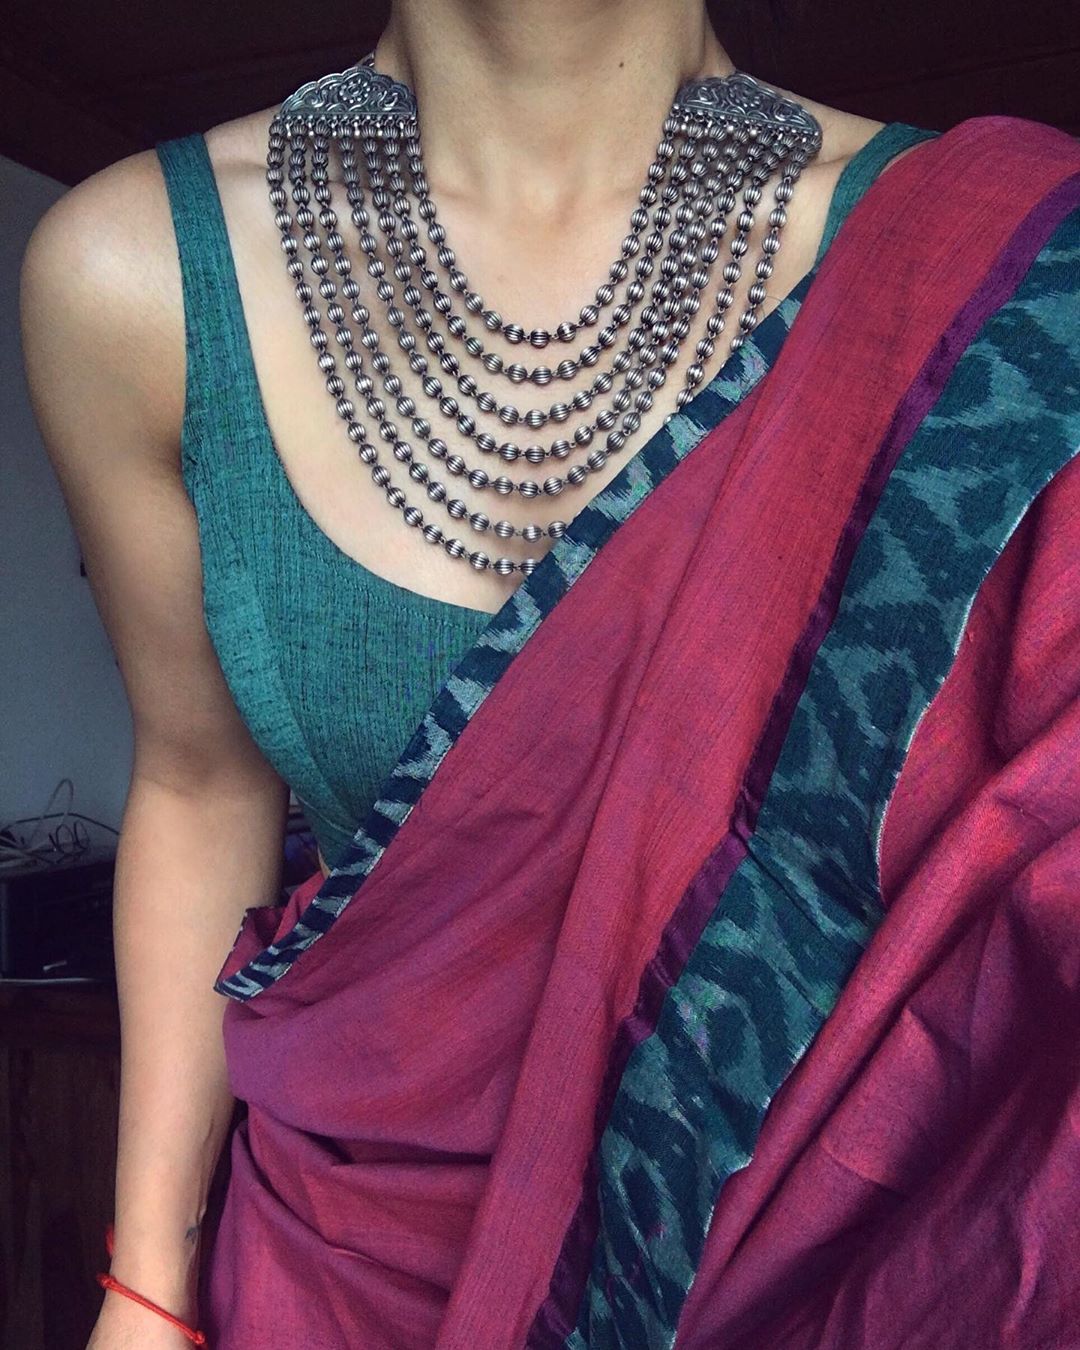 Silver Jewellery & Saree : How To Rock This Combintation! • South India ...